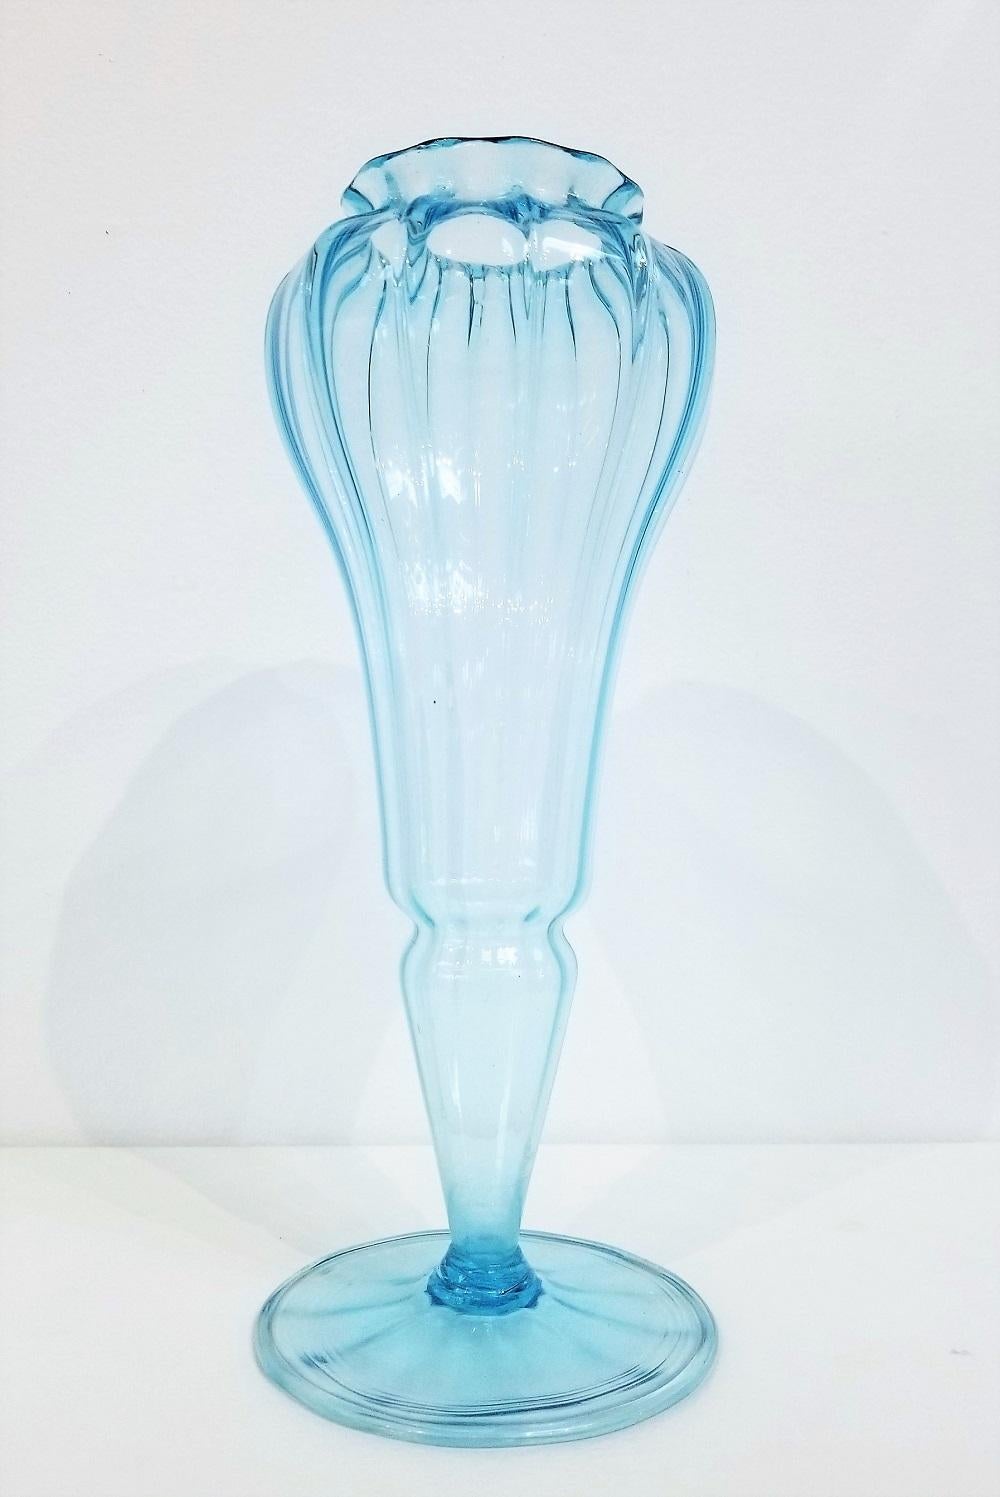 Blown Glass Vase in the Manner of Napoleone Martinuzzi, circa 1925

Offered for sale is a very rare 